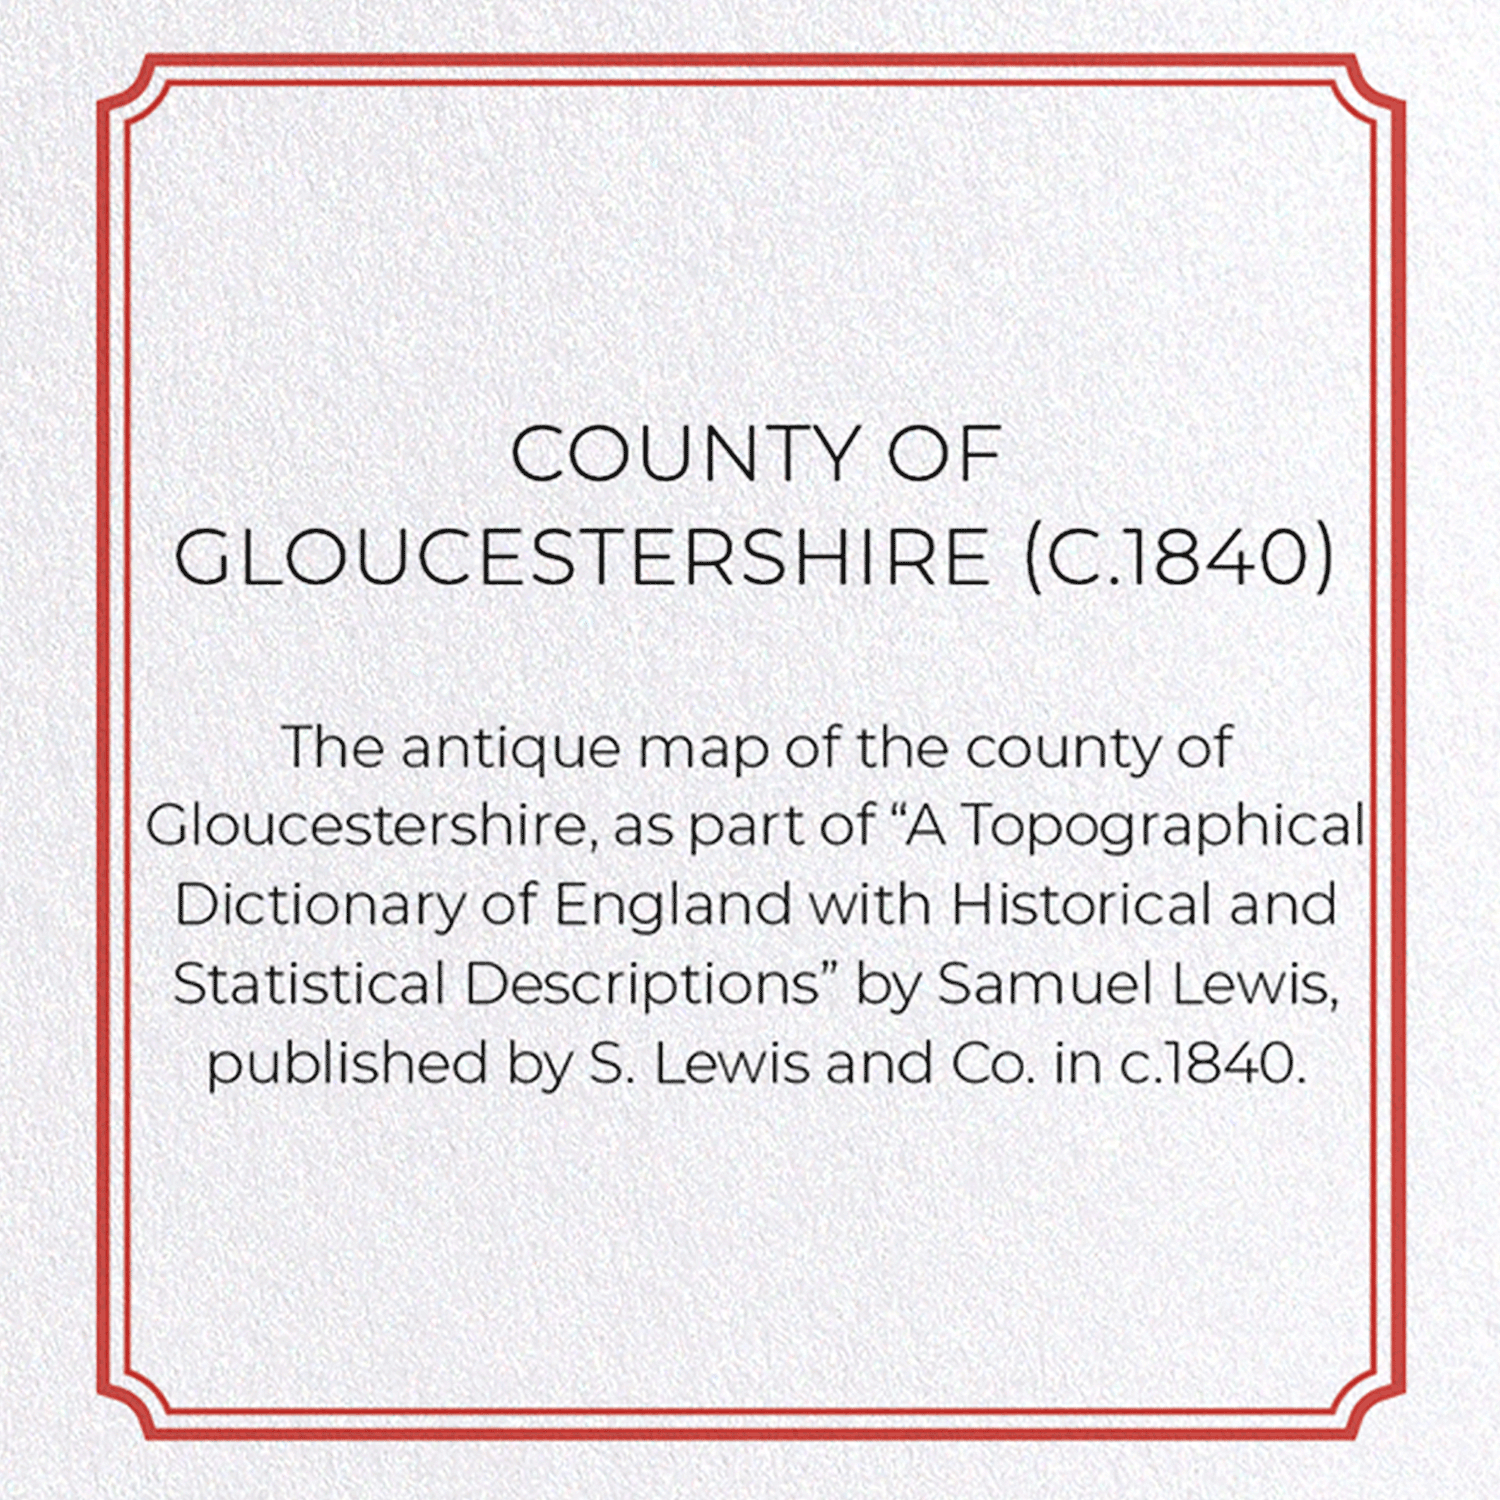 COUNTY OF GLOUCESTERSHIRE (C.1840)